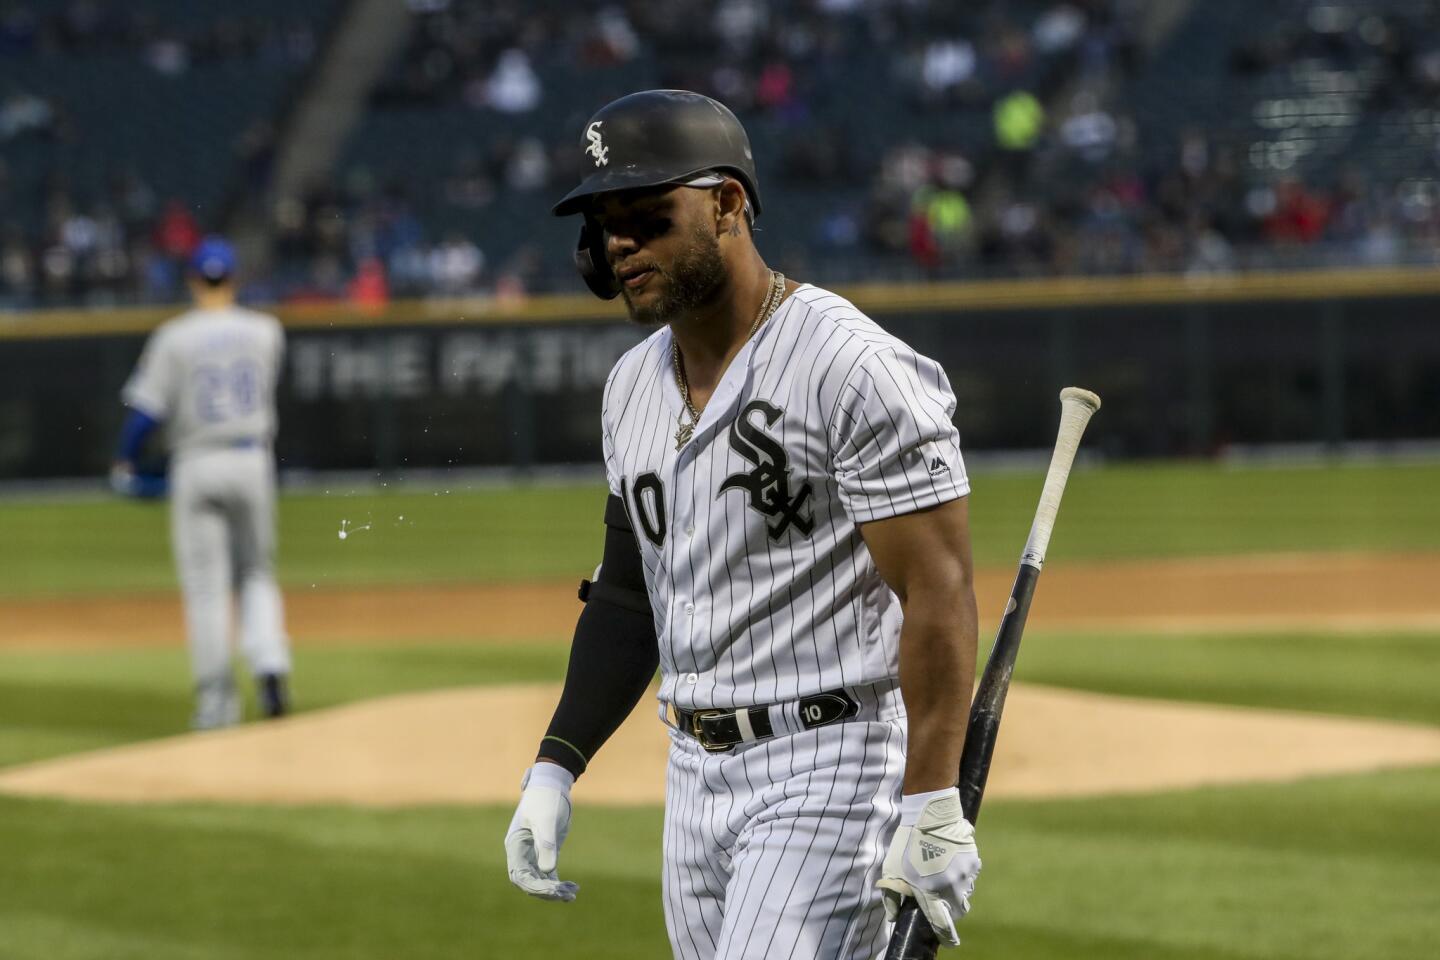 White Sox third baseman Yoan Moncada walks to the dugout after striking out during the first inning against the Royals on April 16, 2019, at Guaranteed Rate Field.